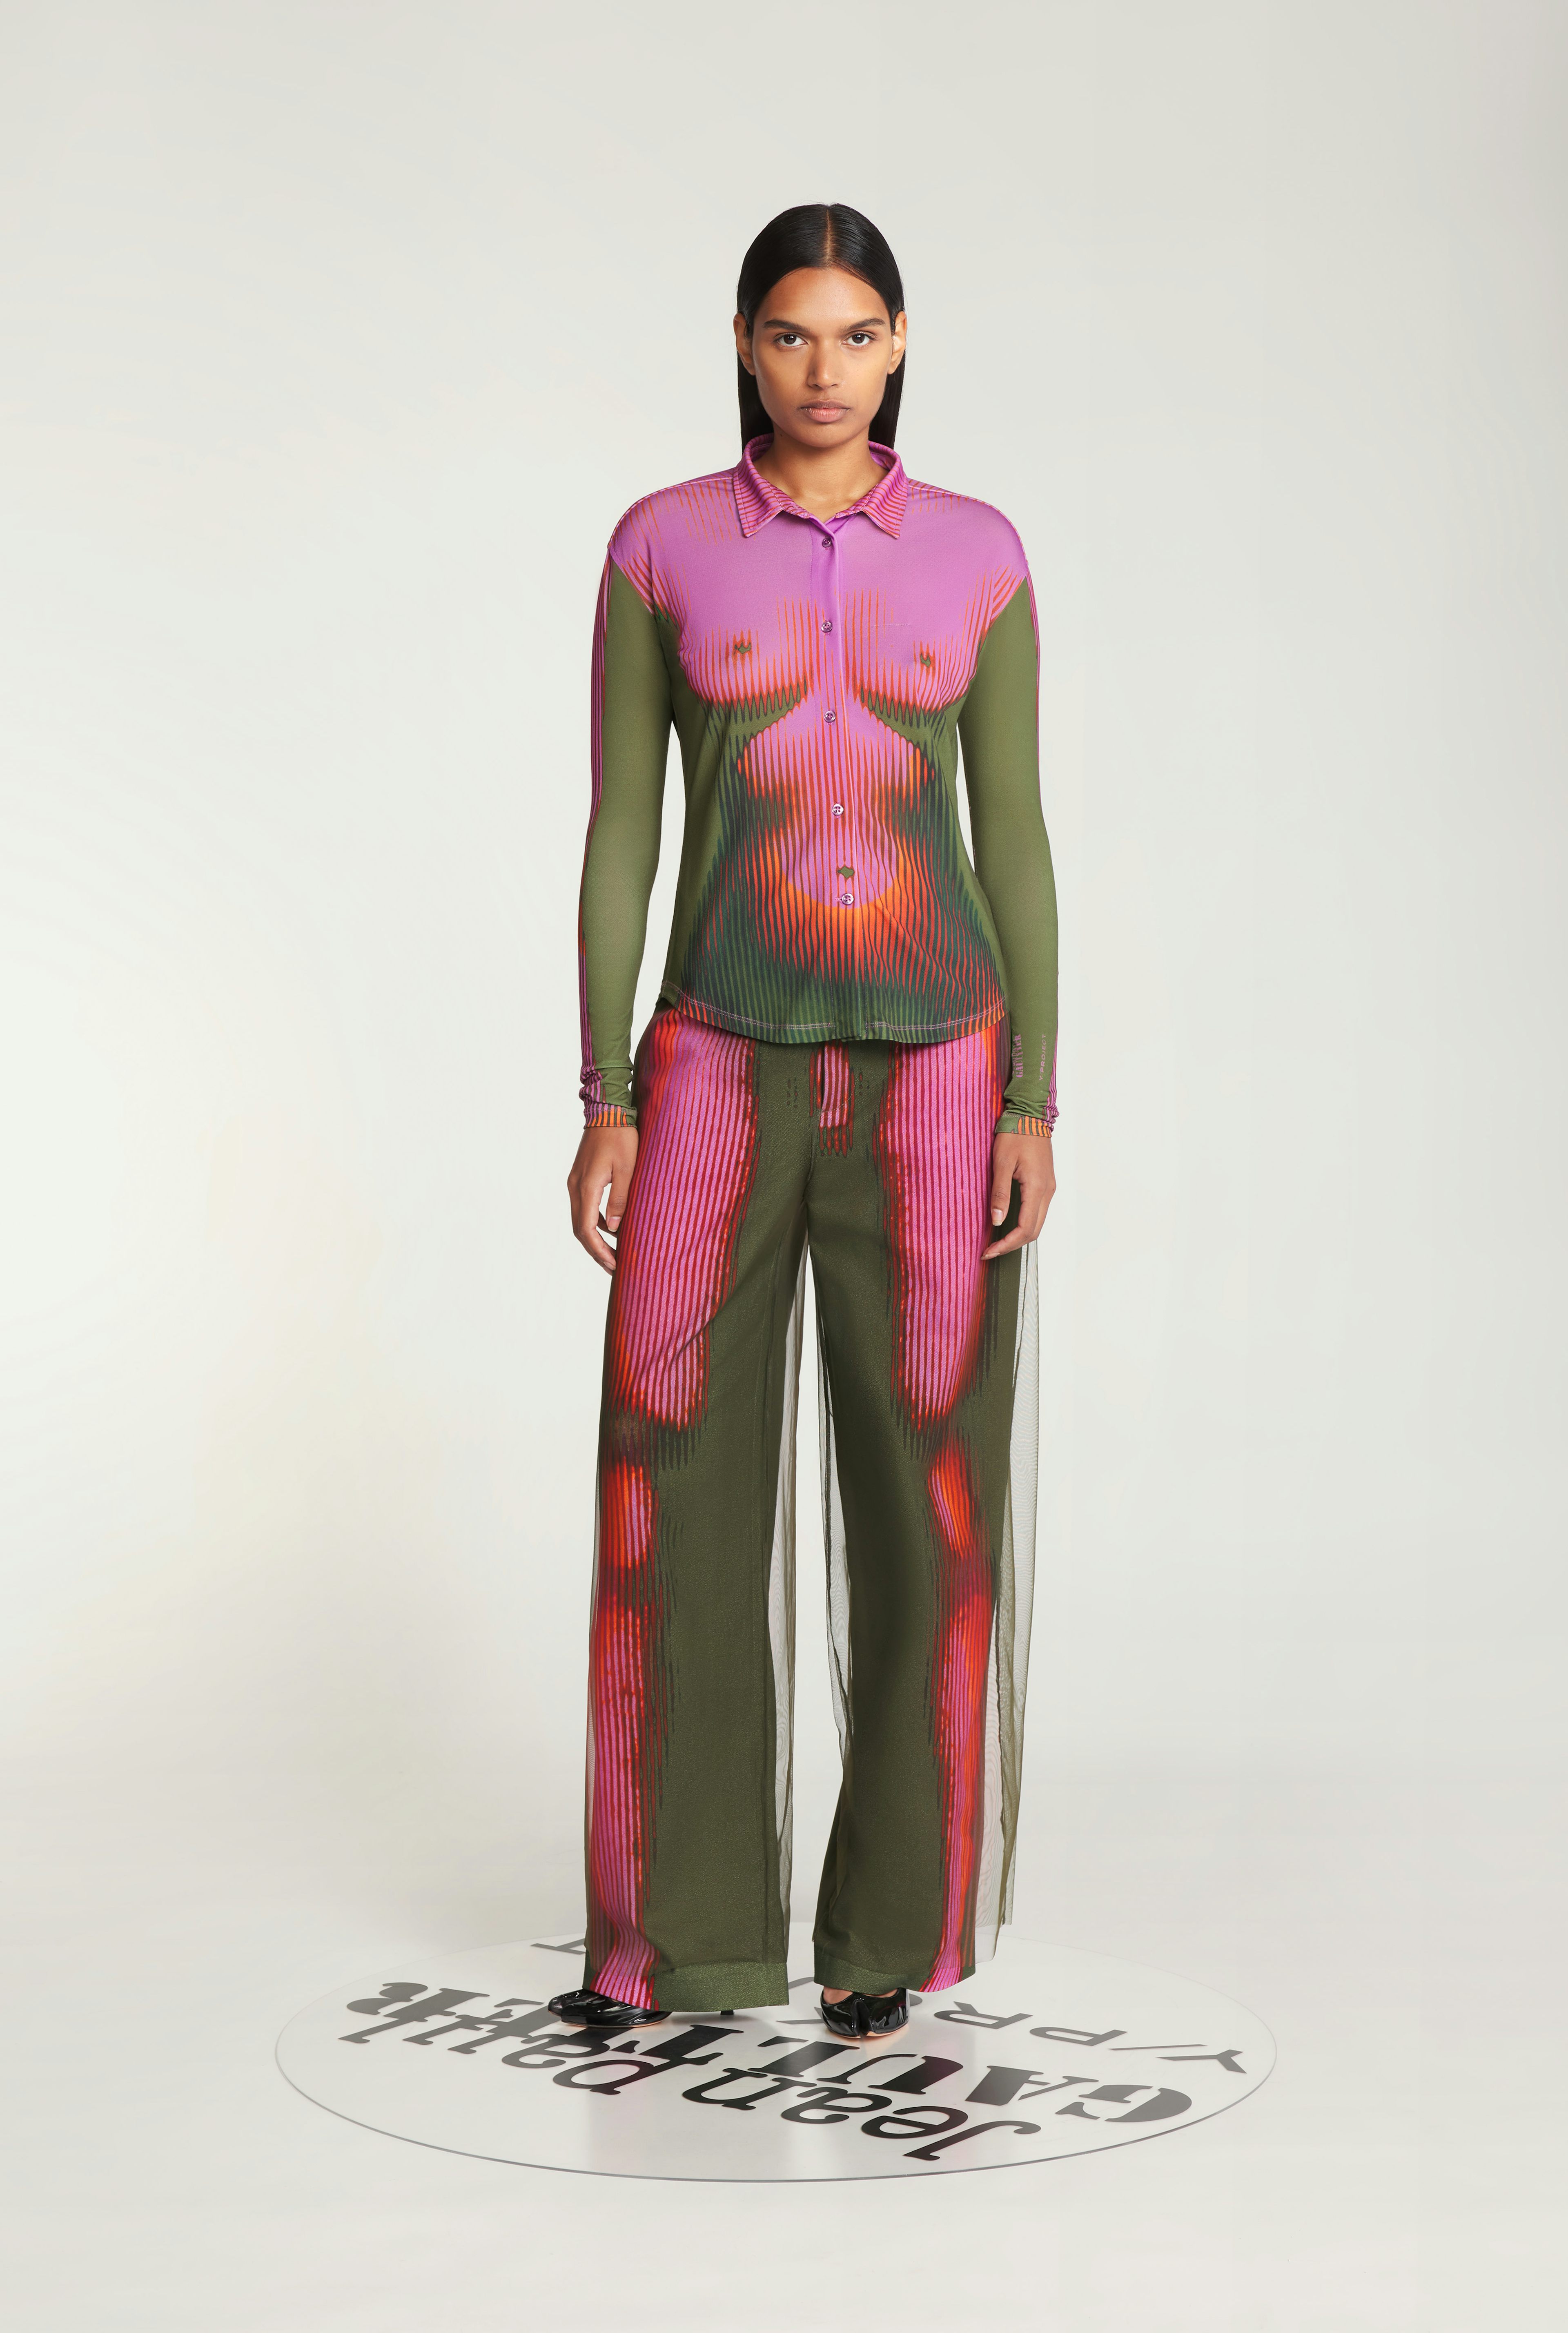 The Pink & Khaki Body Morph Shirt by Jean Paul Gaultier x Y/Project